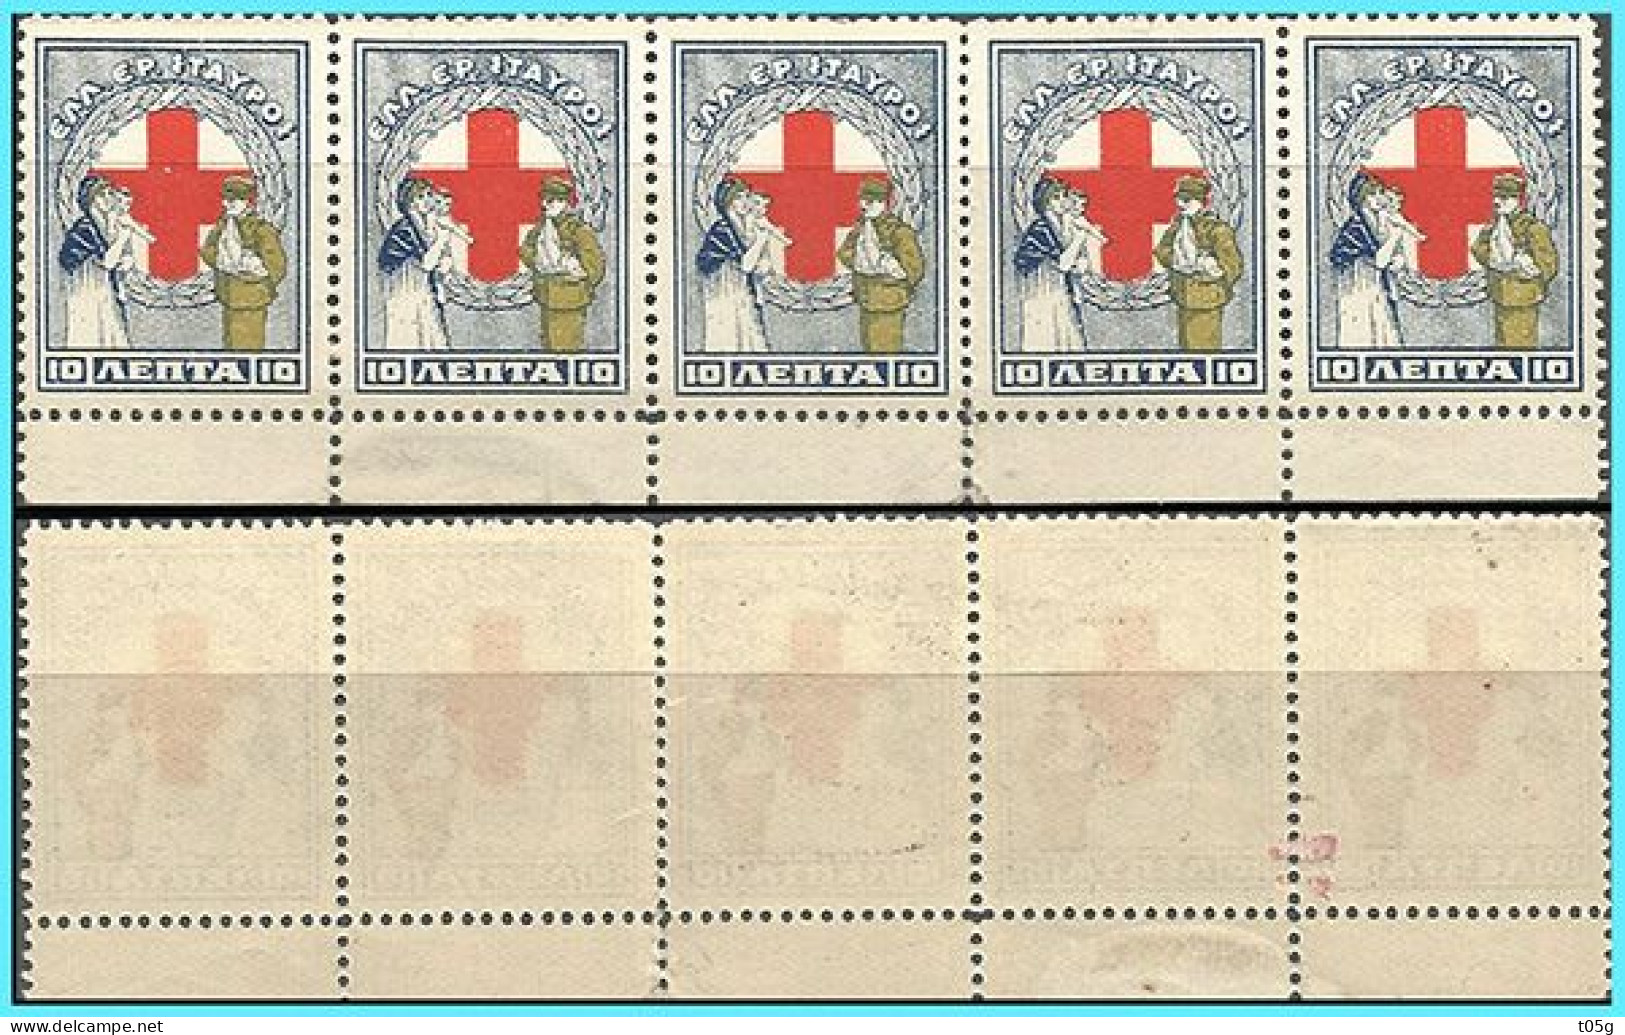 GREECE- GRECE - HELLAS CHARITY STAMPS 1924 : Red Cross" 2X10L Set MNH** & 3X10L  set MLH* - Beneficiencia (Sellos De)